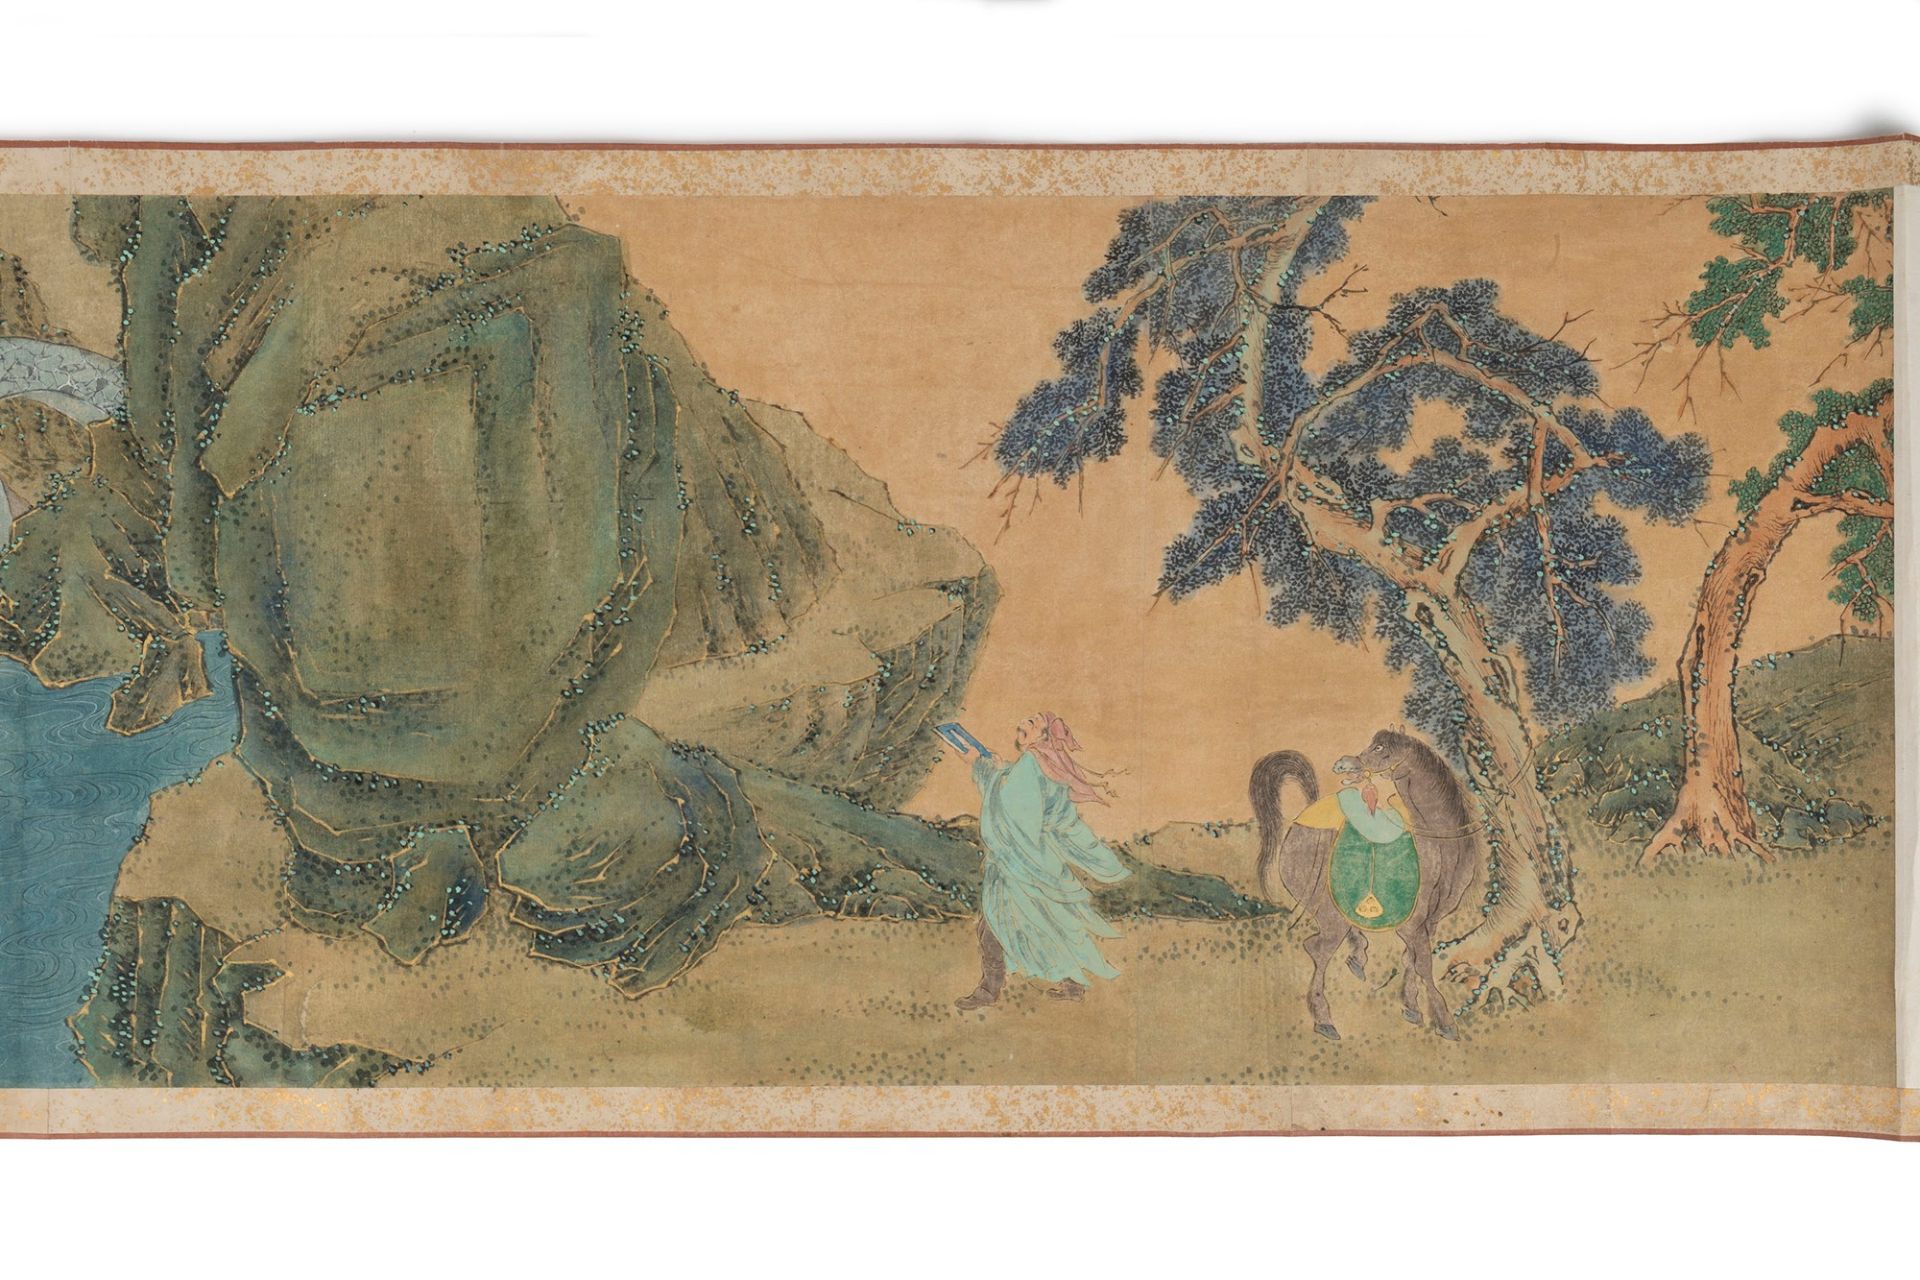 Emakimono painted on paper representing a river landscape, Edo period Japan